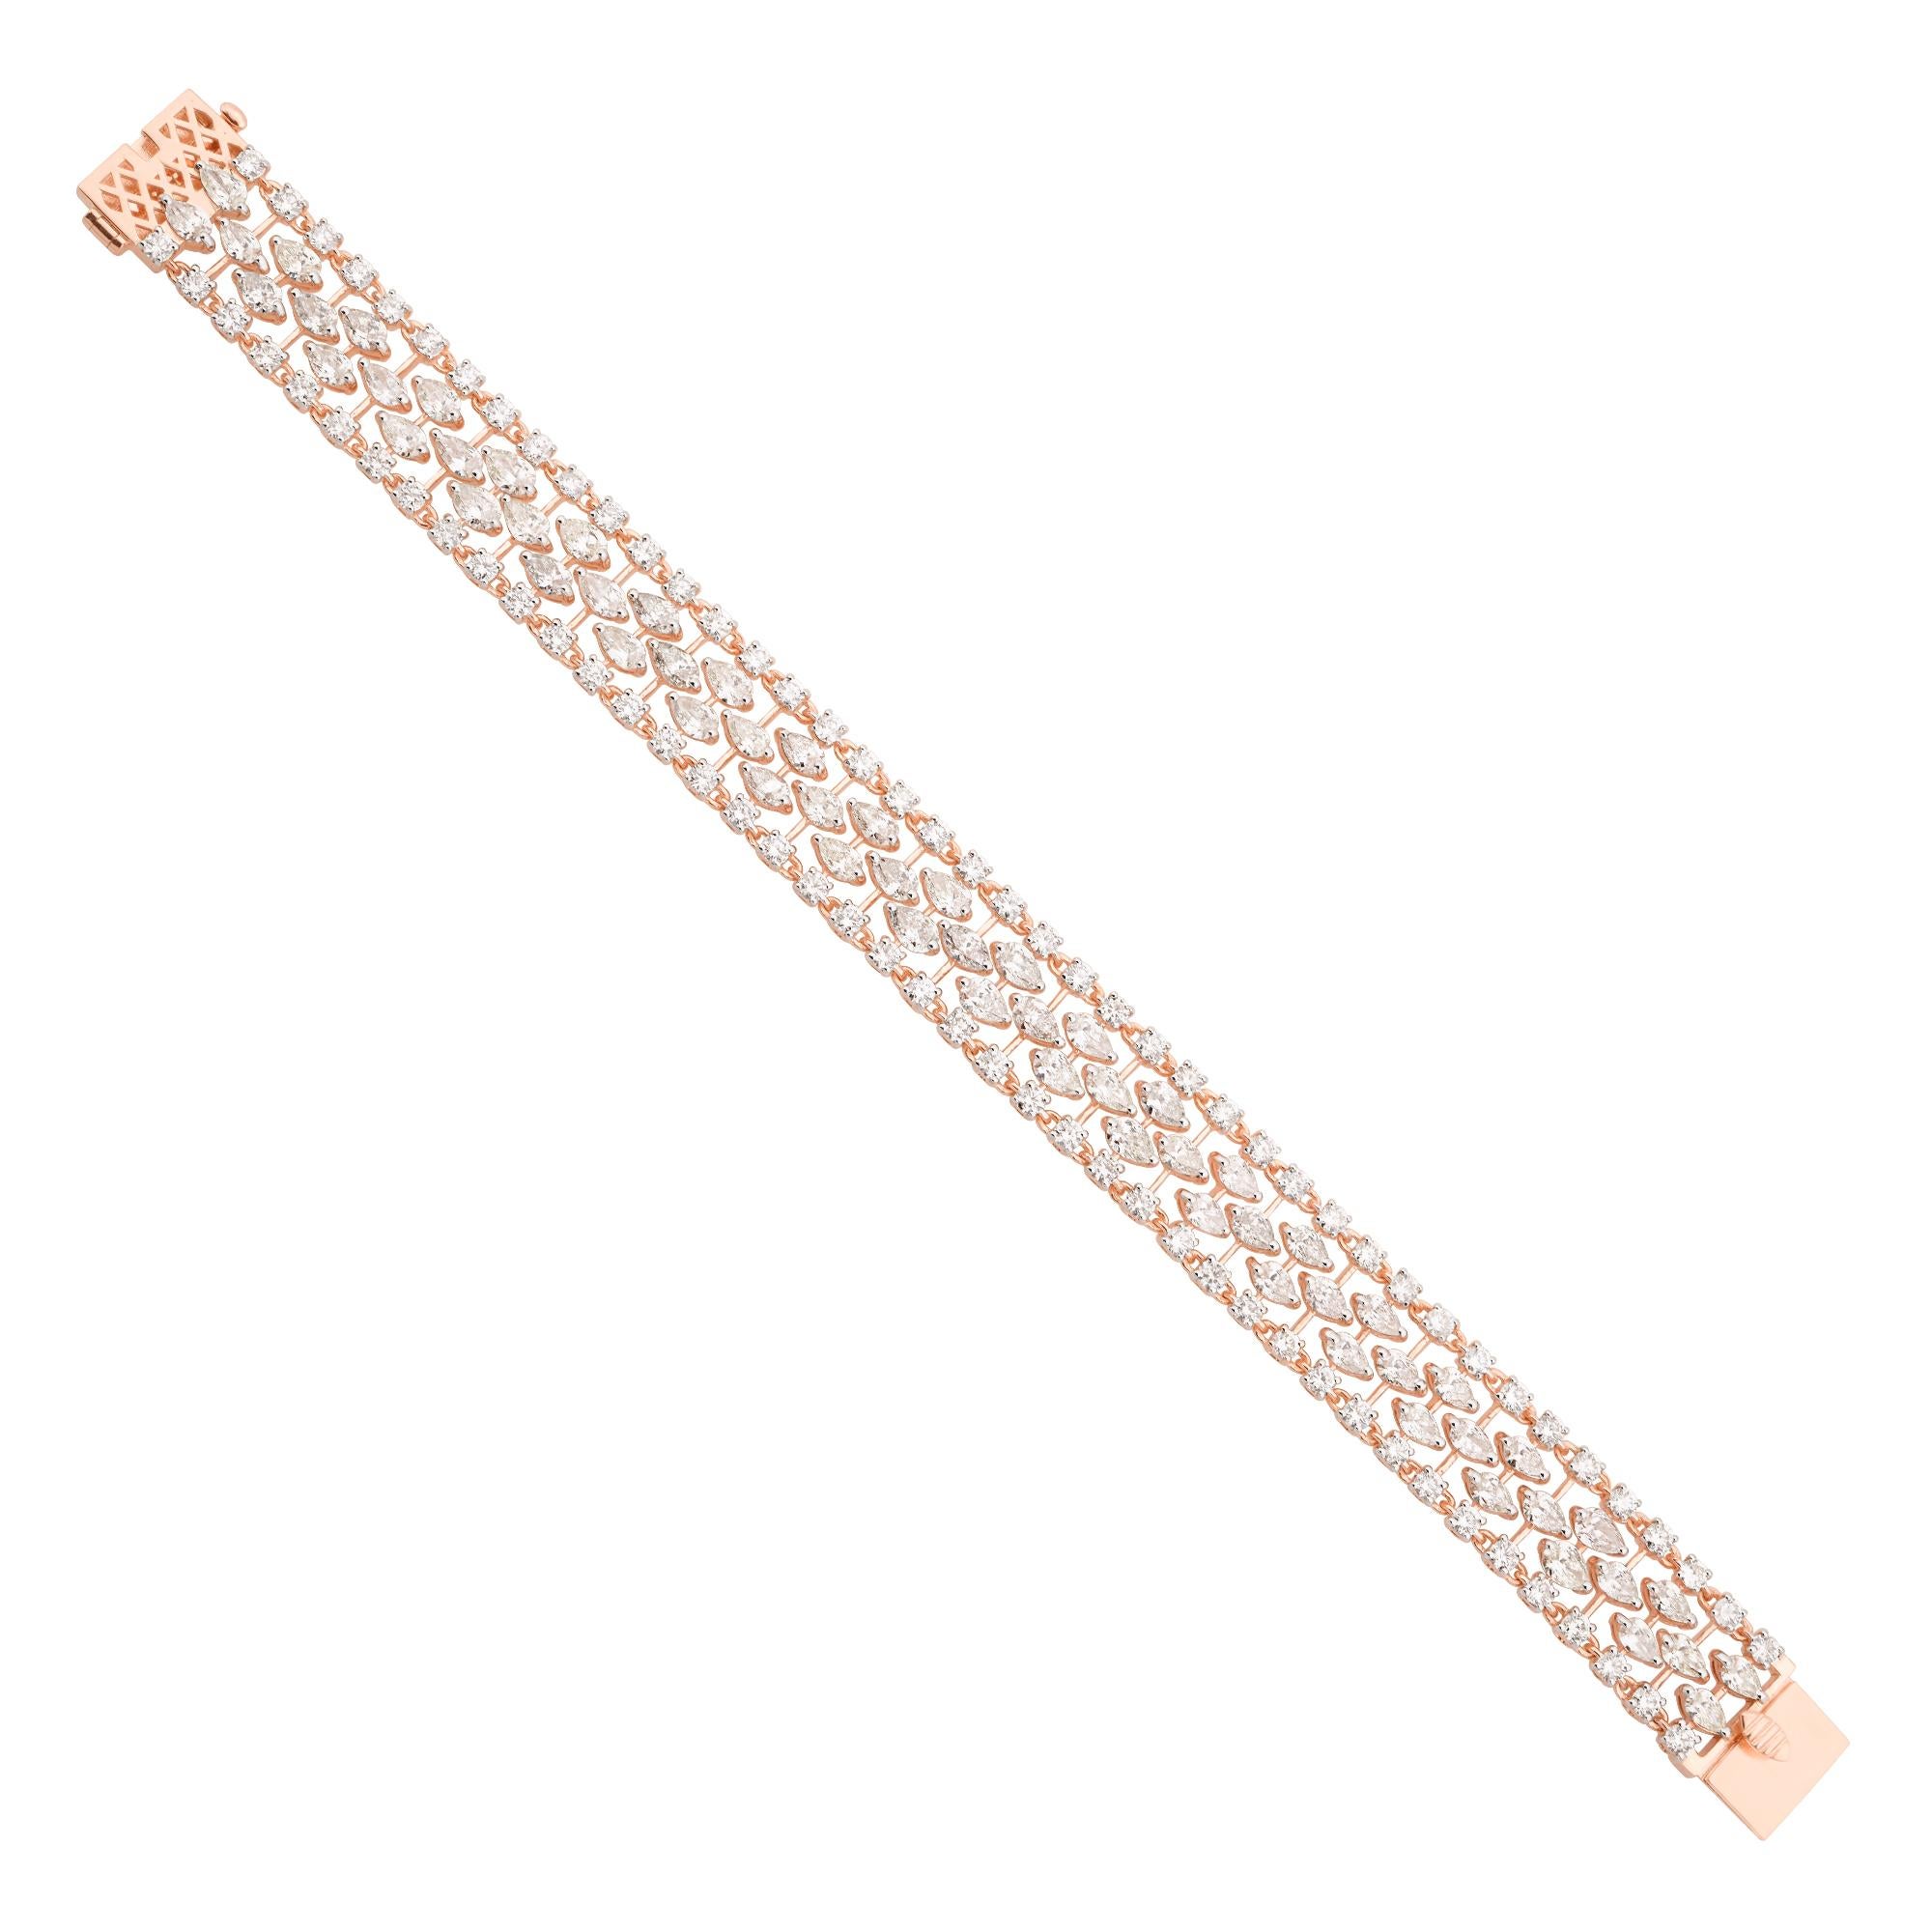 Item Code :- SEBR-41508A
Gross Wt. :- 28.14 gm
18k Solid Rose Gold Wt. :- 25.60 gm
Natural Diamond Wt. :- 12.70 Ct. ( AVERAGE DIAMOND CLARITY SI1-SI2 & COLOR H-I )
Bracelet Length :- 7 Inches Long

✦ Sizing
.....................
We can adjust most